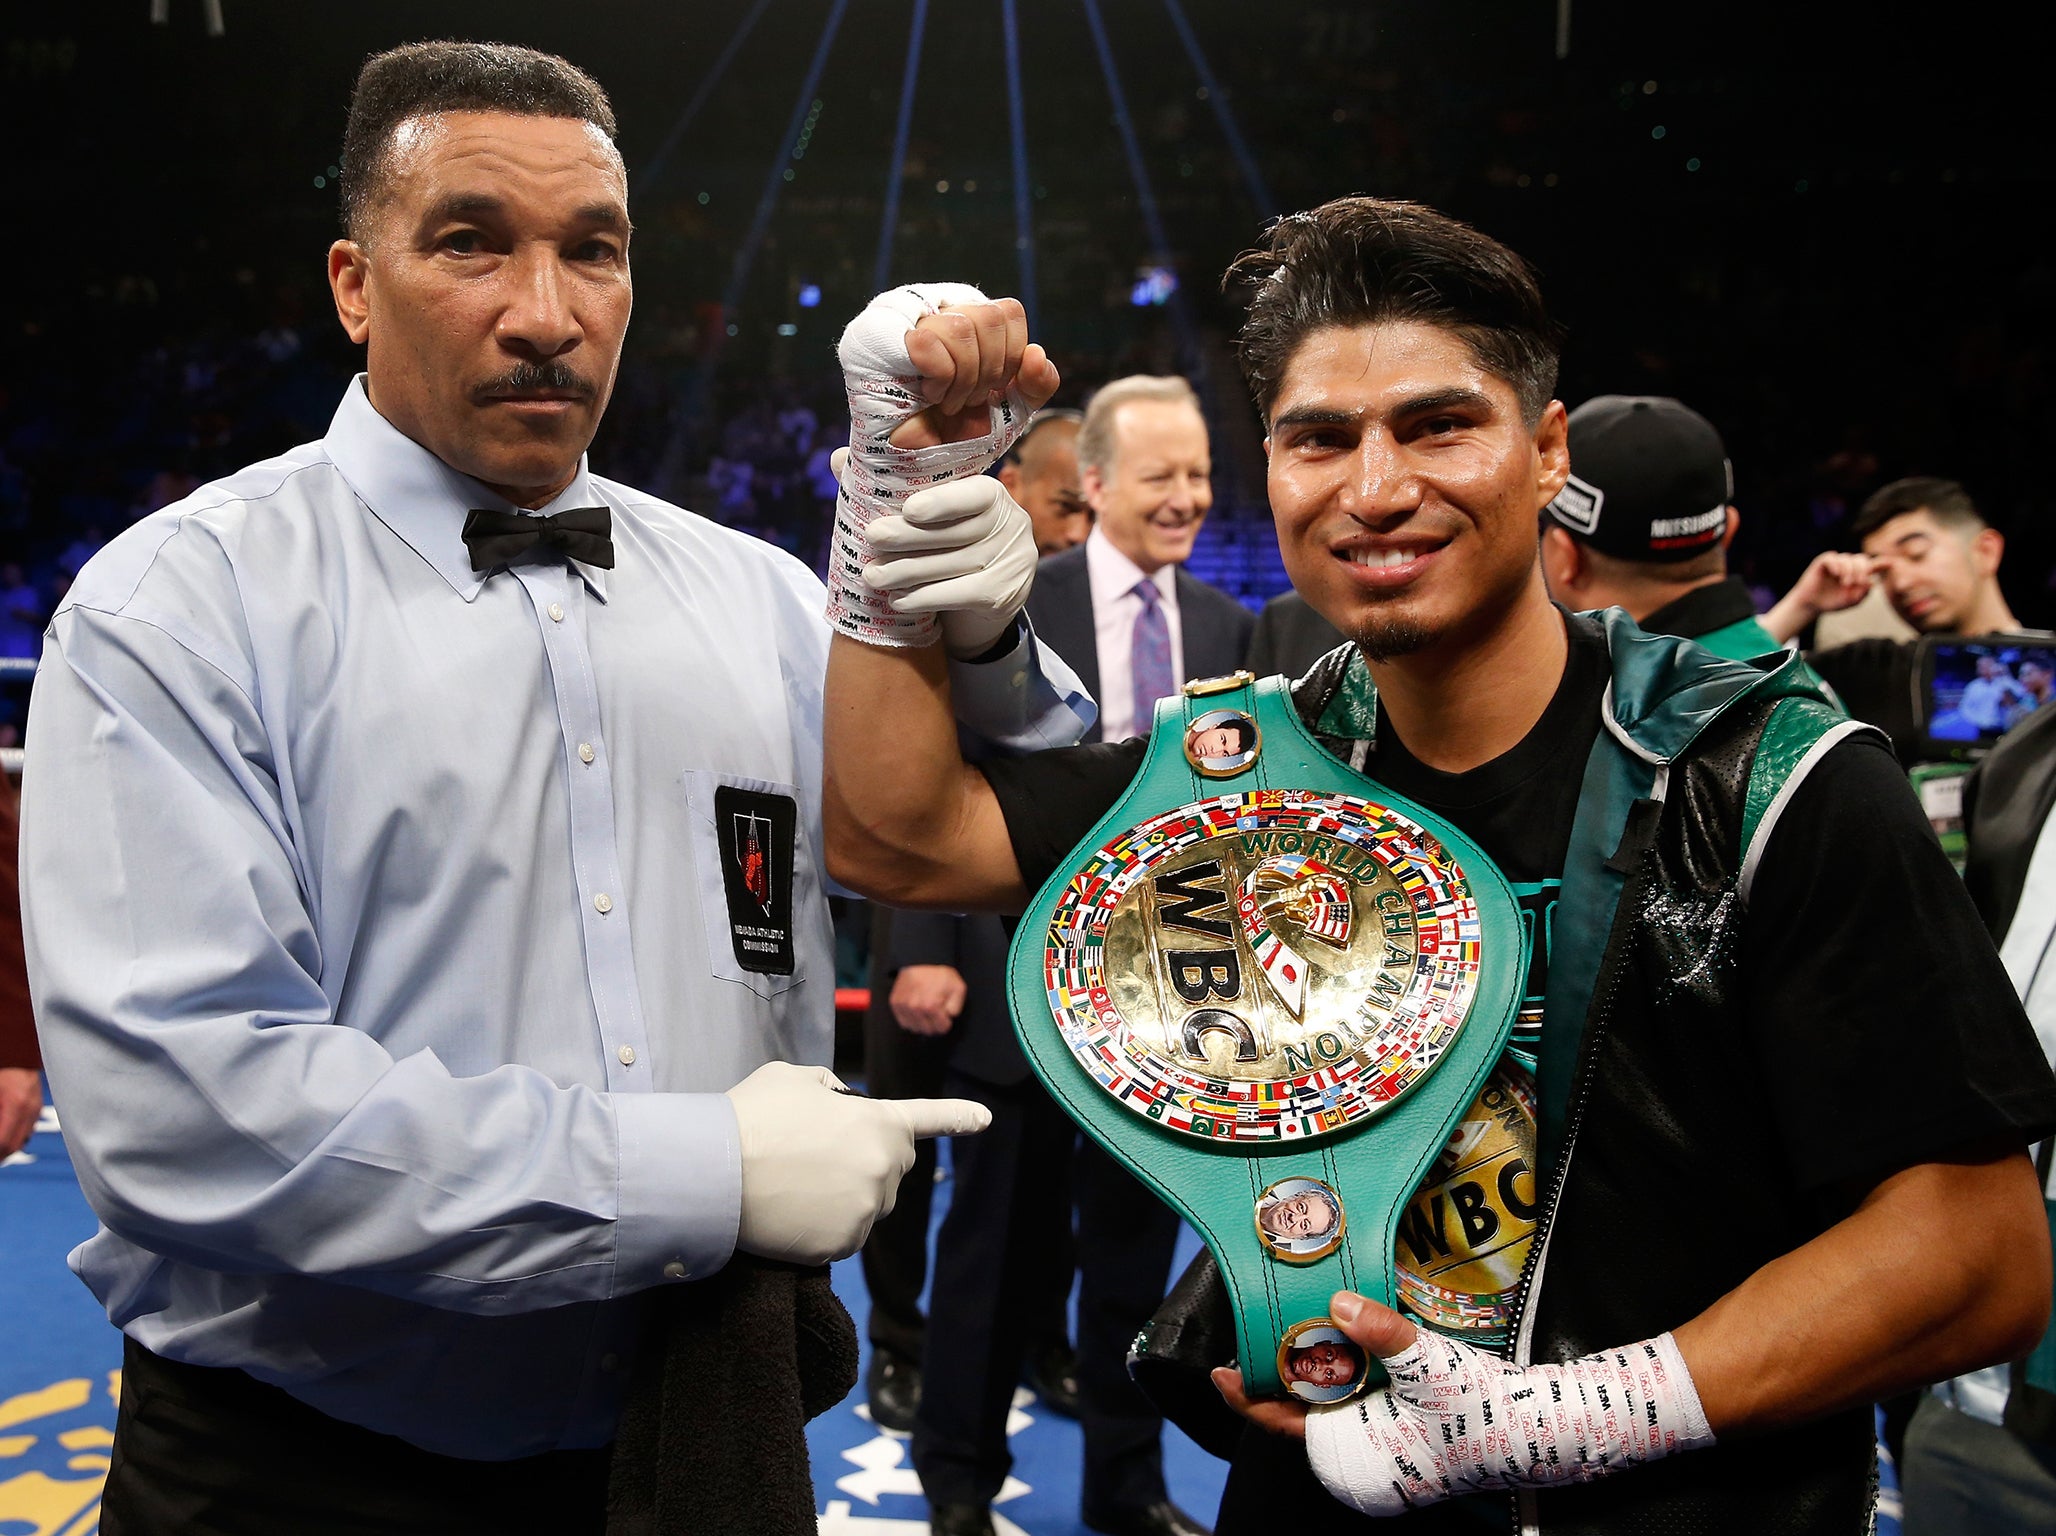 Mikey Garcia currently holds the WBC and IBF lightweight titles